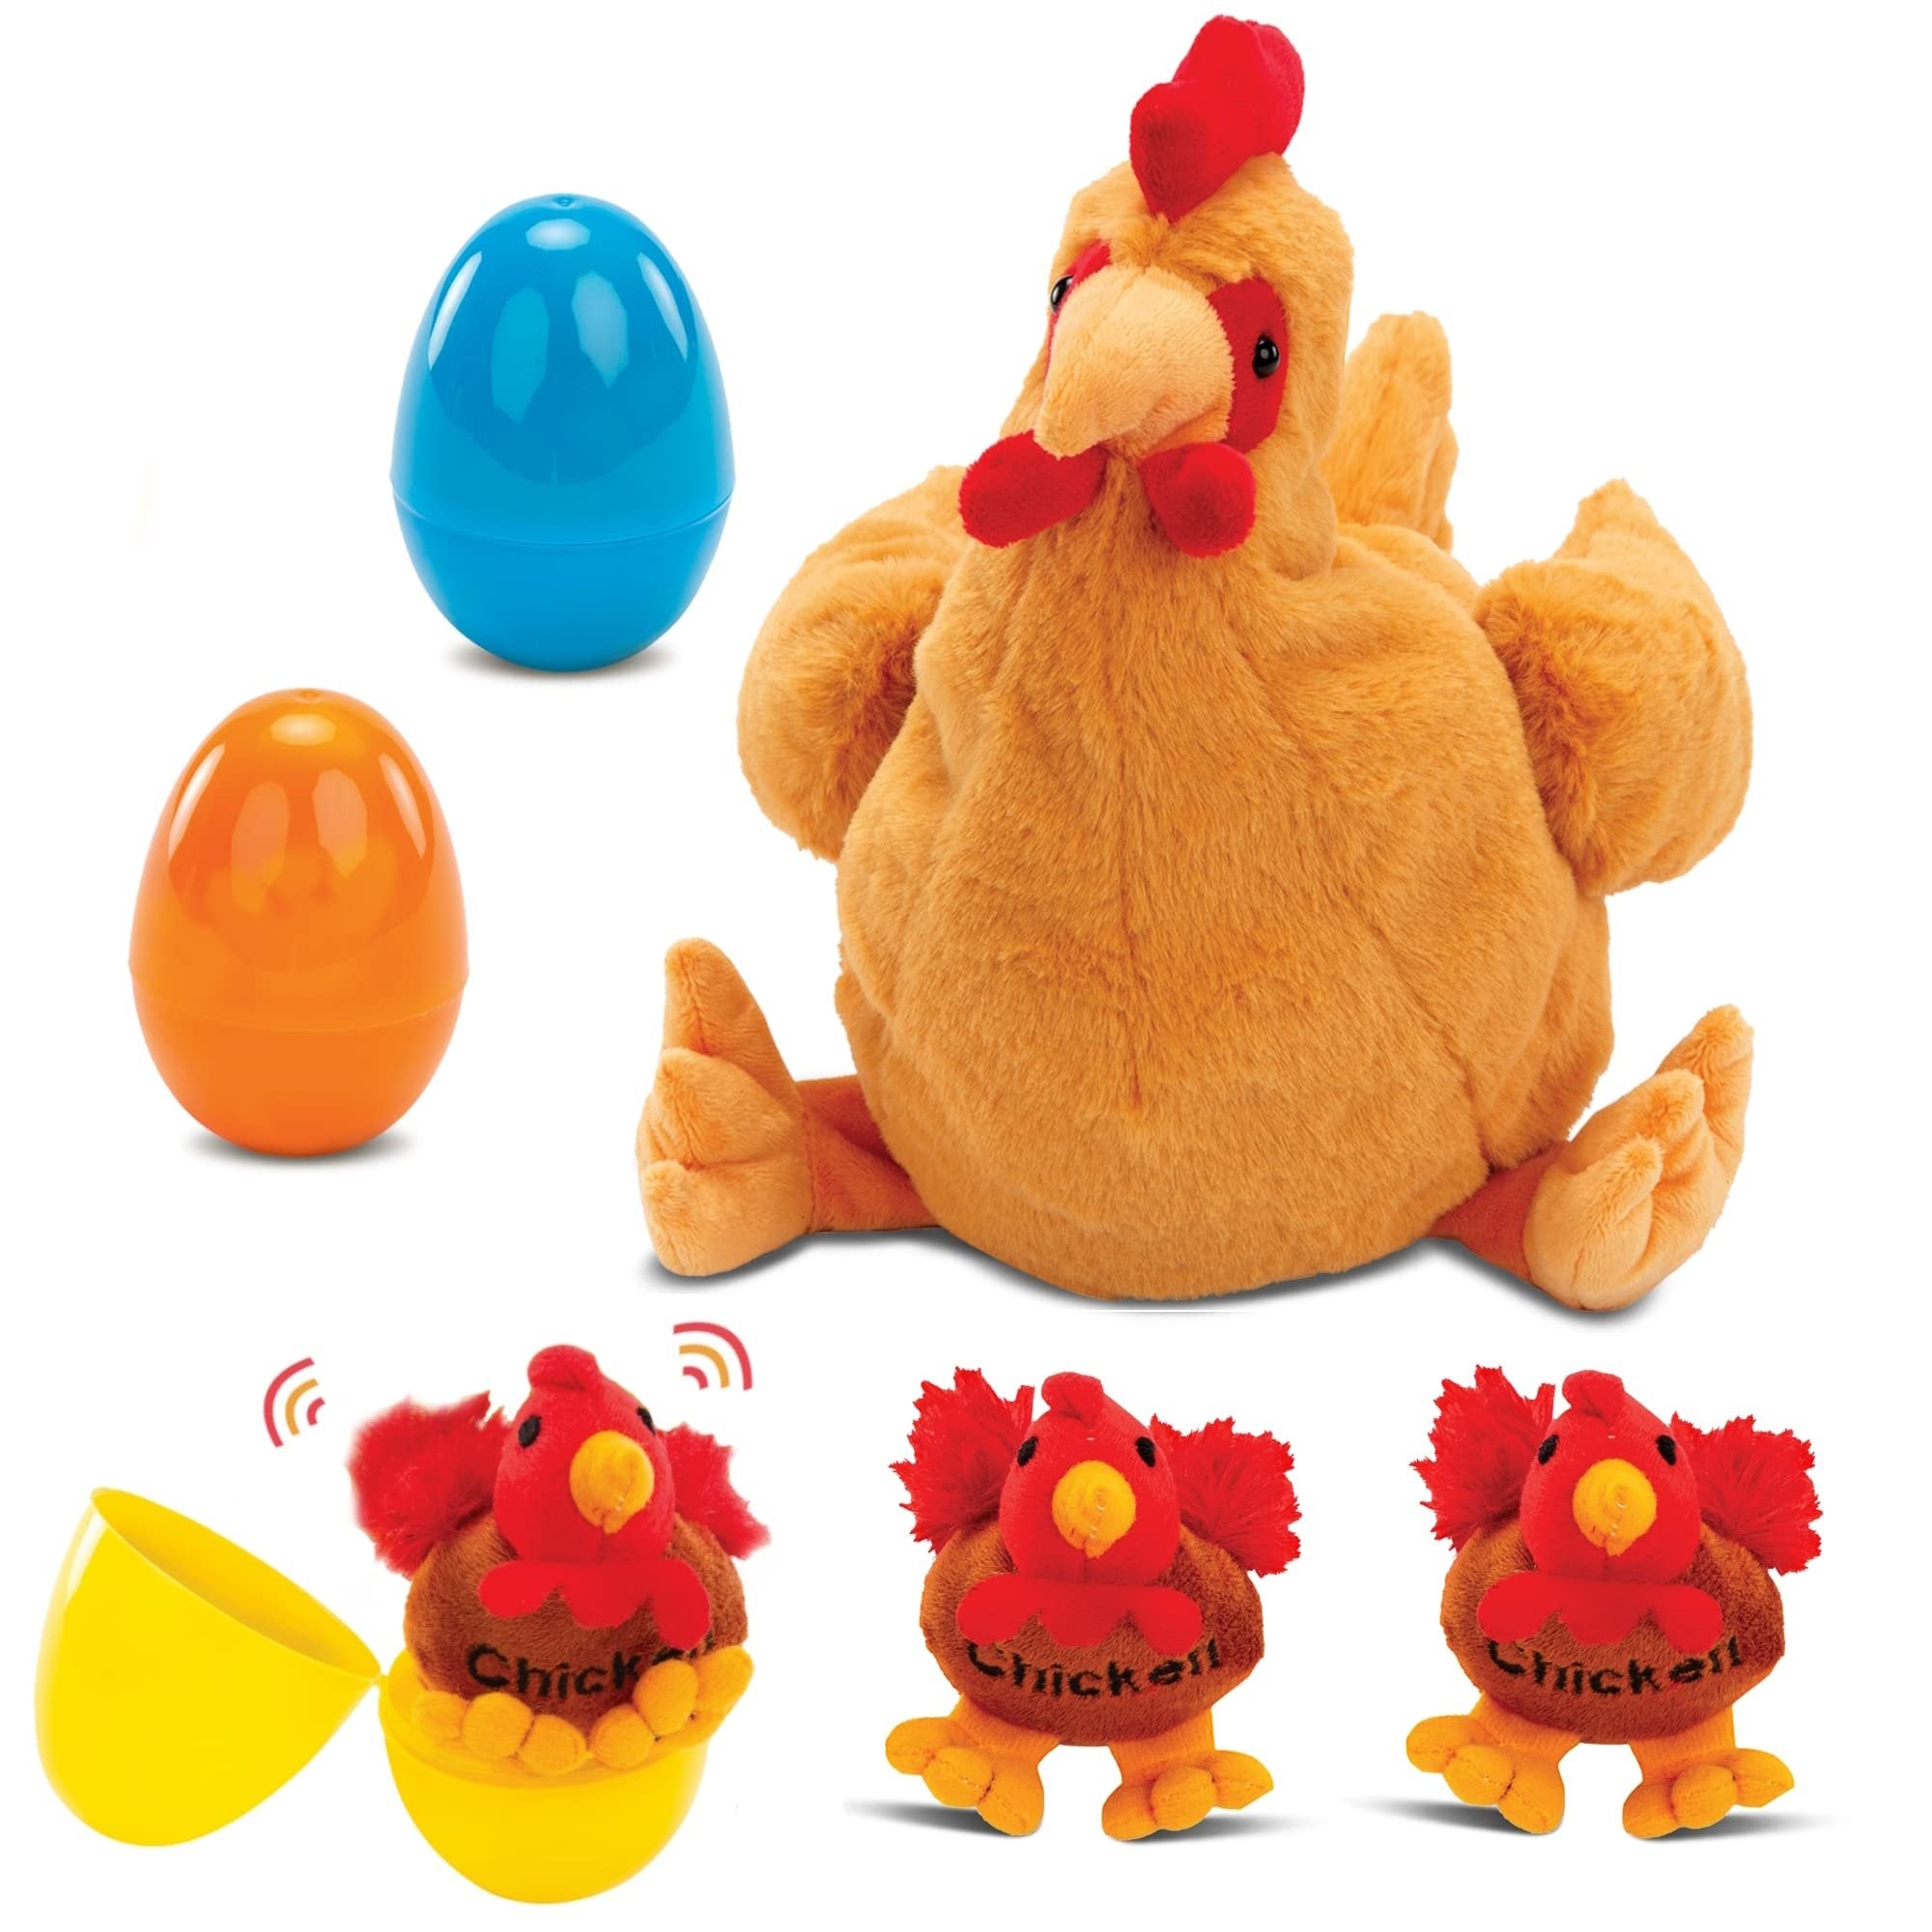 Bundaloo Plush Mother Chicken Hen and Baby Chicks with 3 Colorful Plastic Eggs Playset with Sound and Storage Pouch